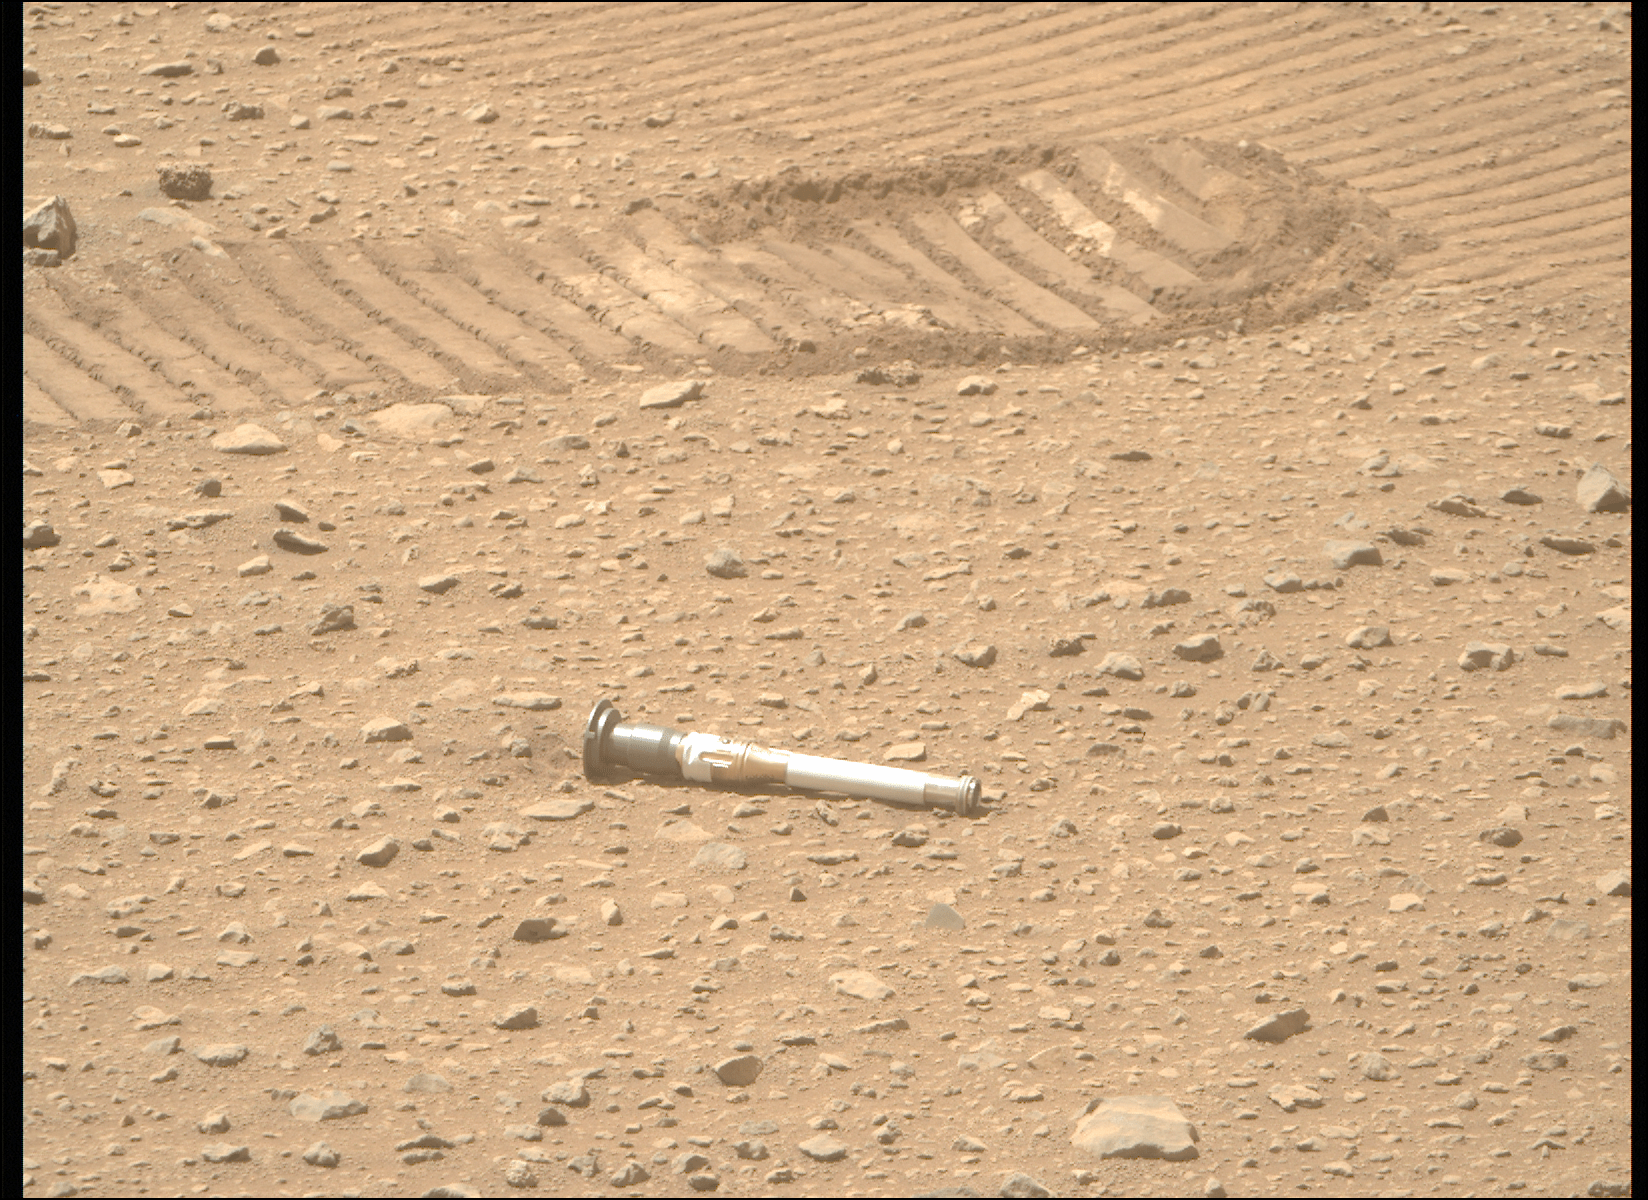 Perseverance takes a photo of one of a sample tube on the Martian terrain.